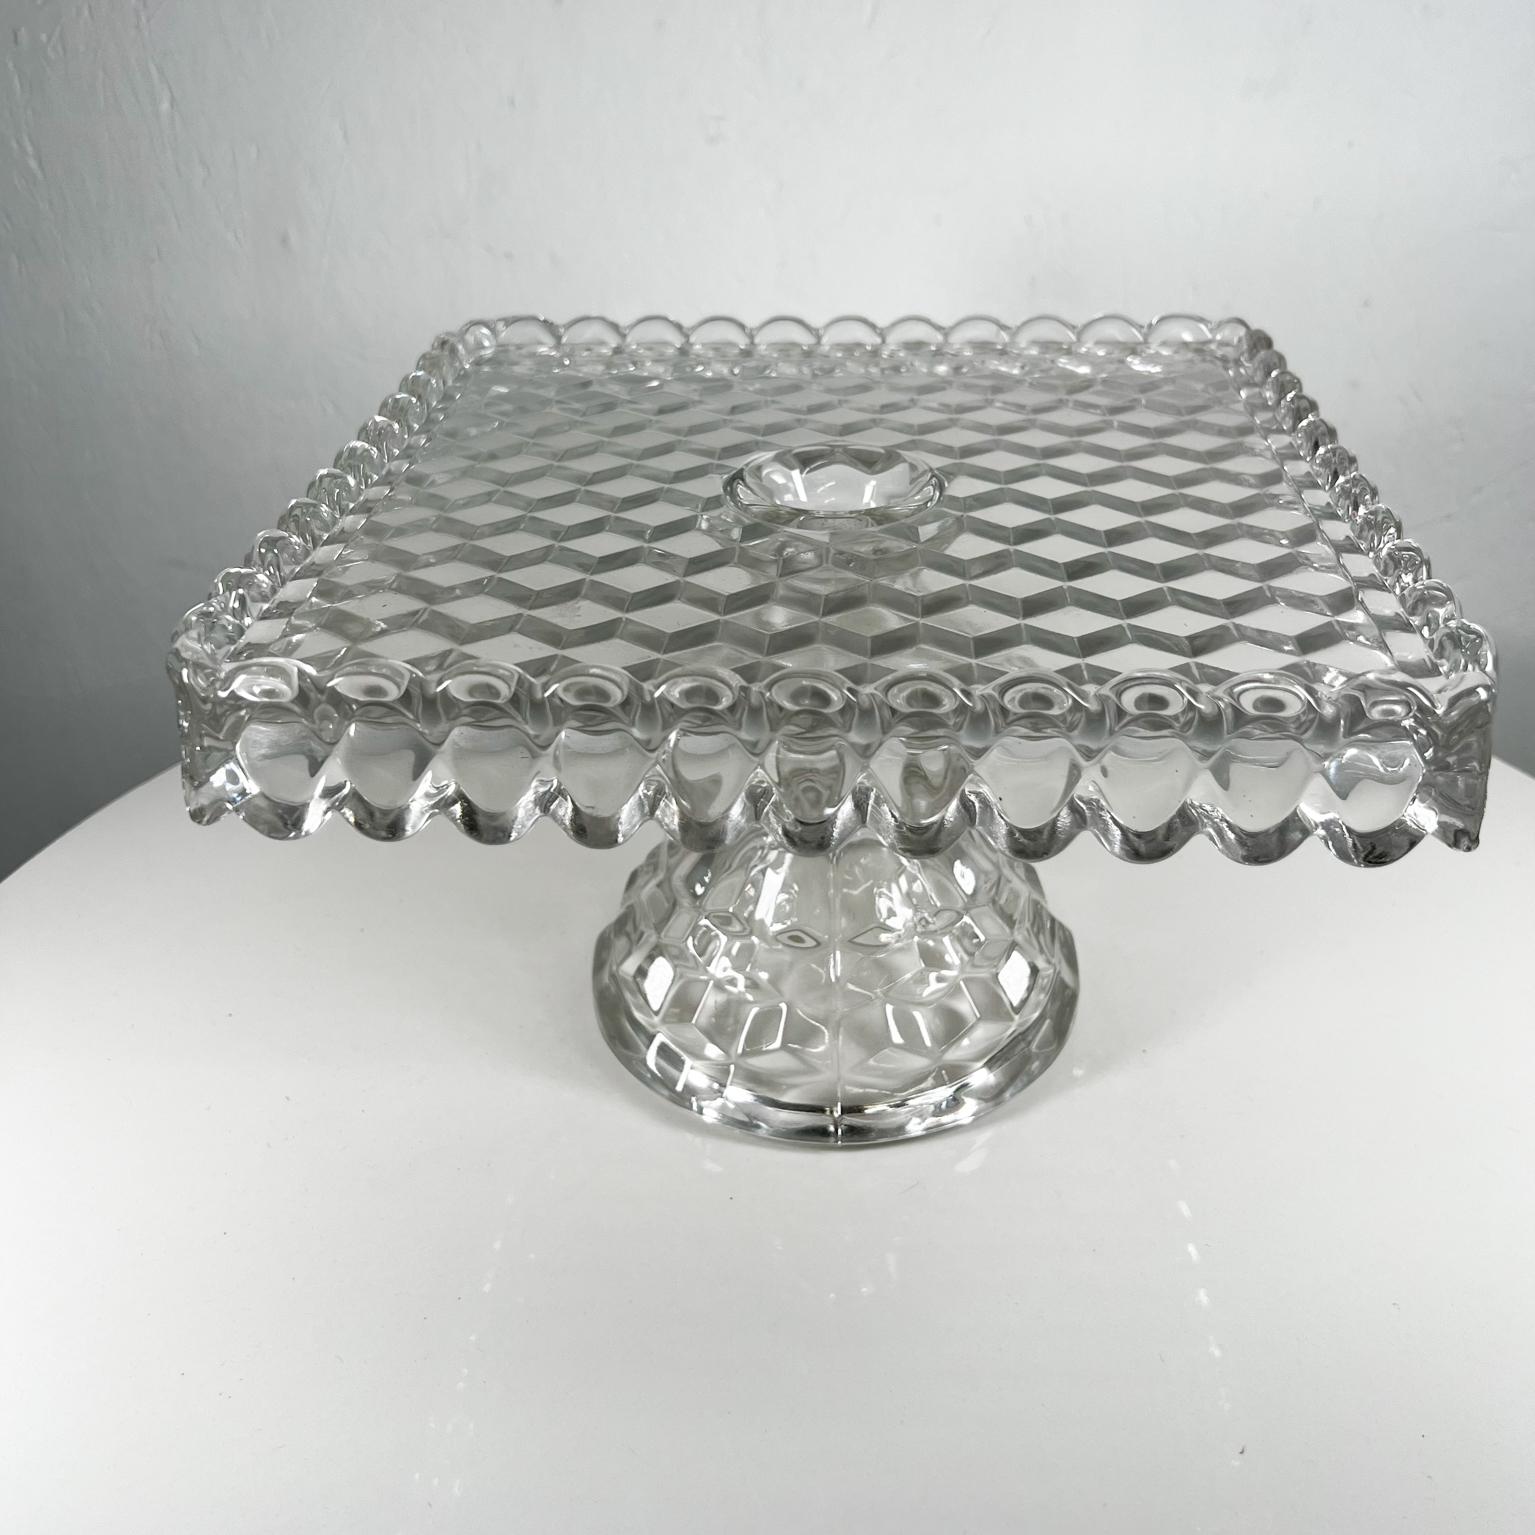 Antique Vintage Fostoria American series clear stem square cake stand 
With Pedestal base rum well and ruffled edge
10.38 x 10.38 x 7 tall
Preowned original vintage condition.
Review images provided.